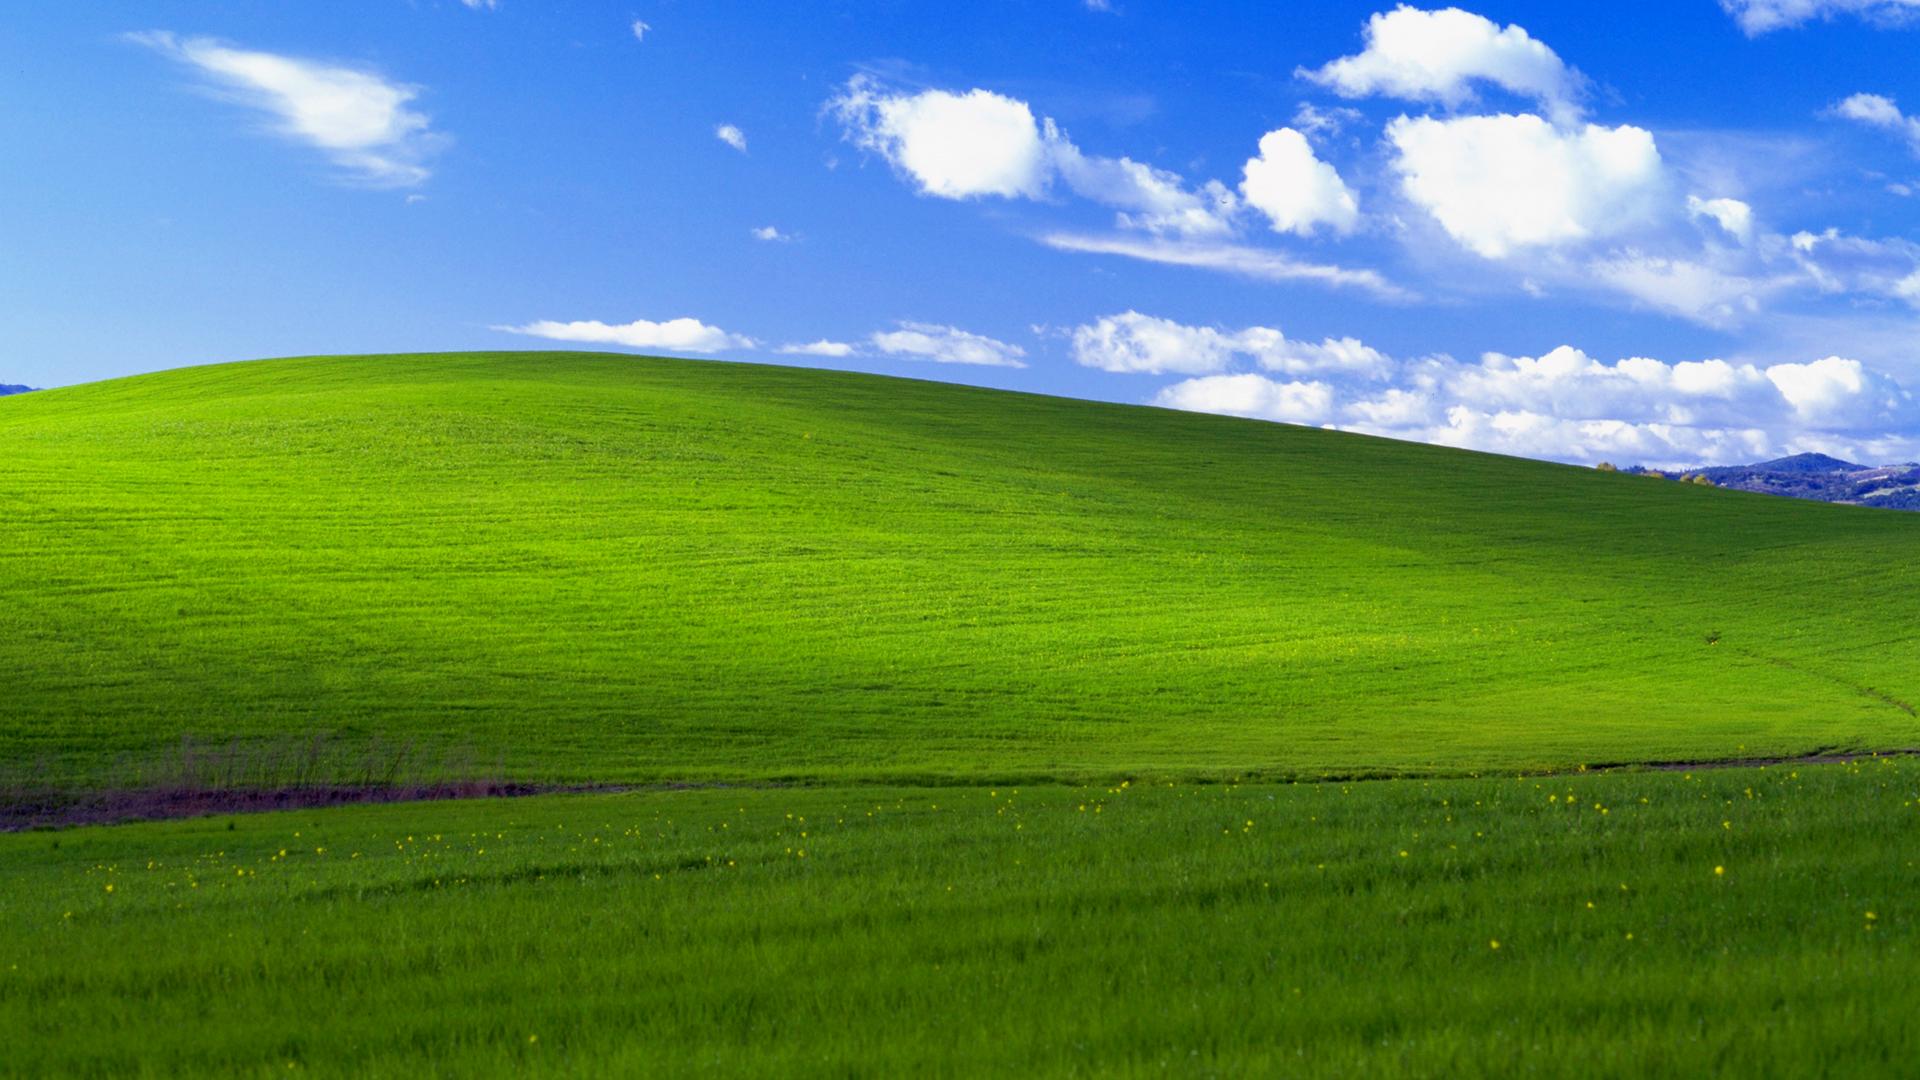 The Most Famous Windows Wallpaper Ever Turns